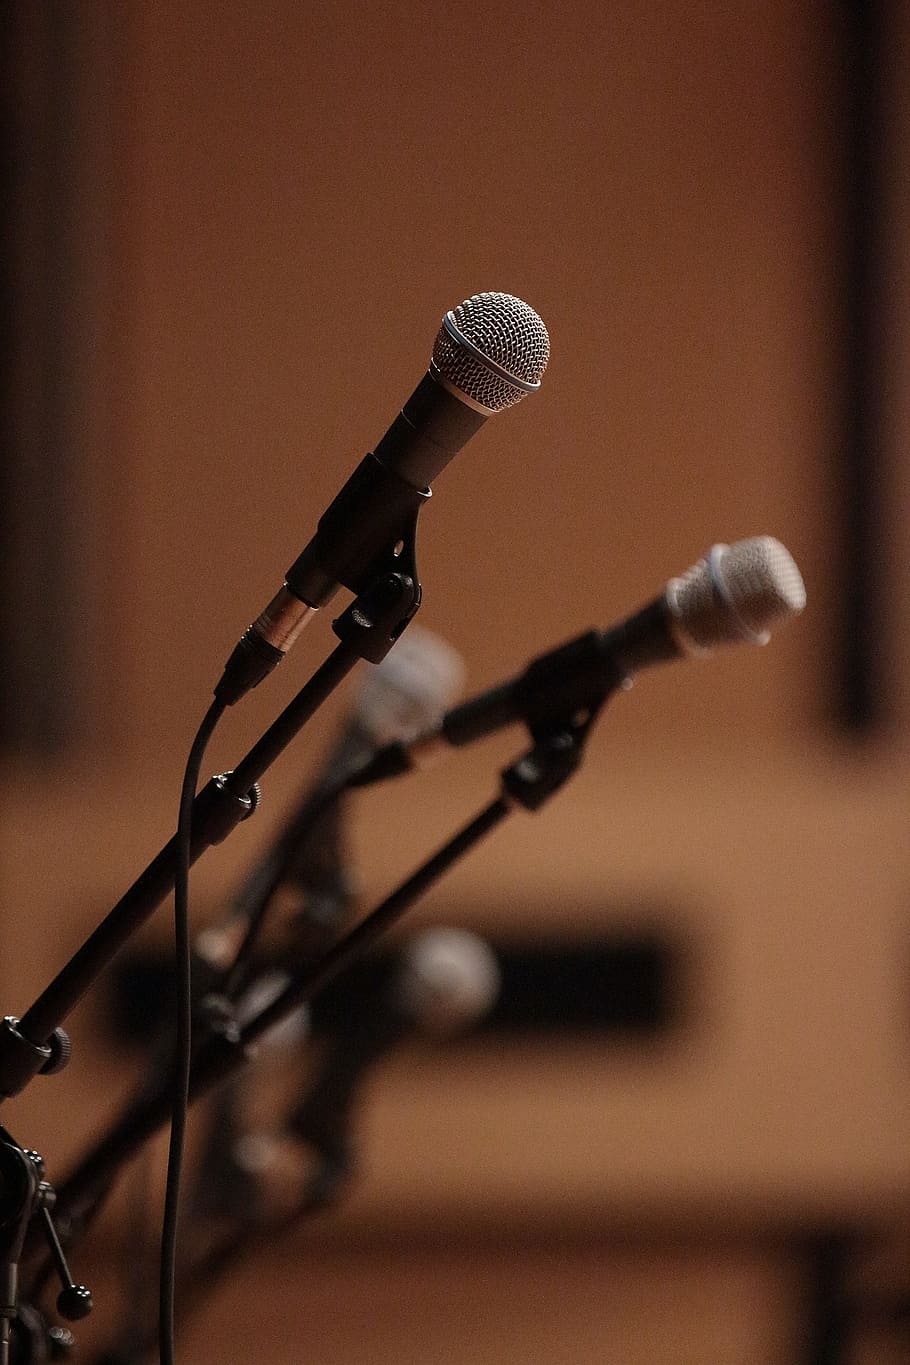 microphone, music, singer, sing, input device, arts culture and entertainment, microphone stand, focus on foreground, musical instrument, indoors